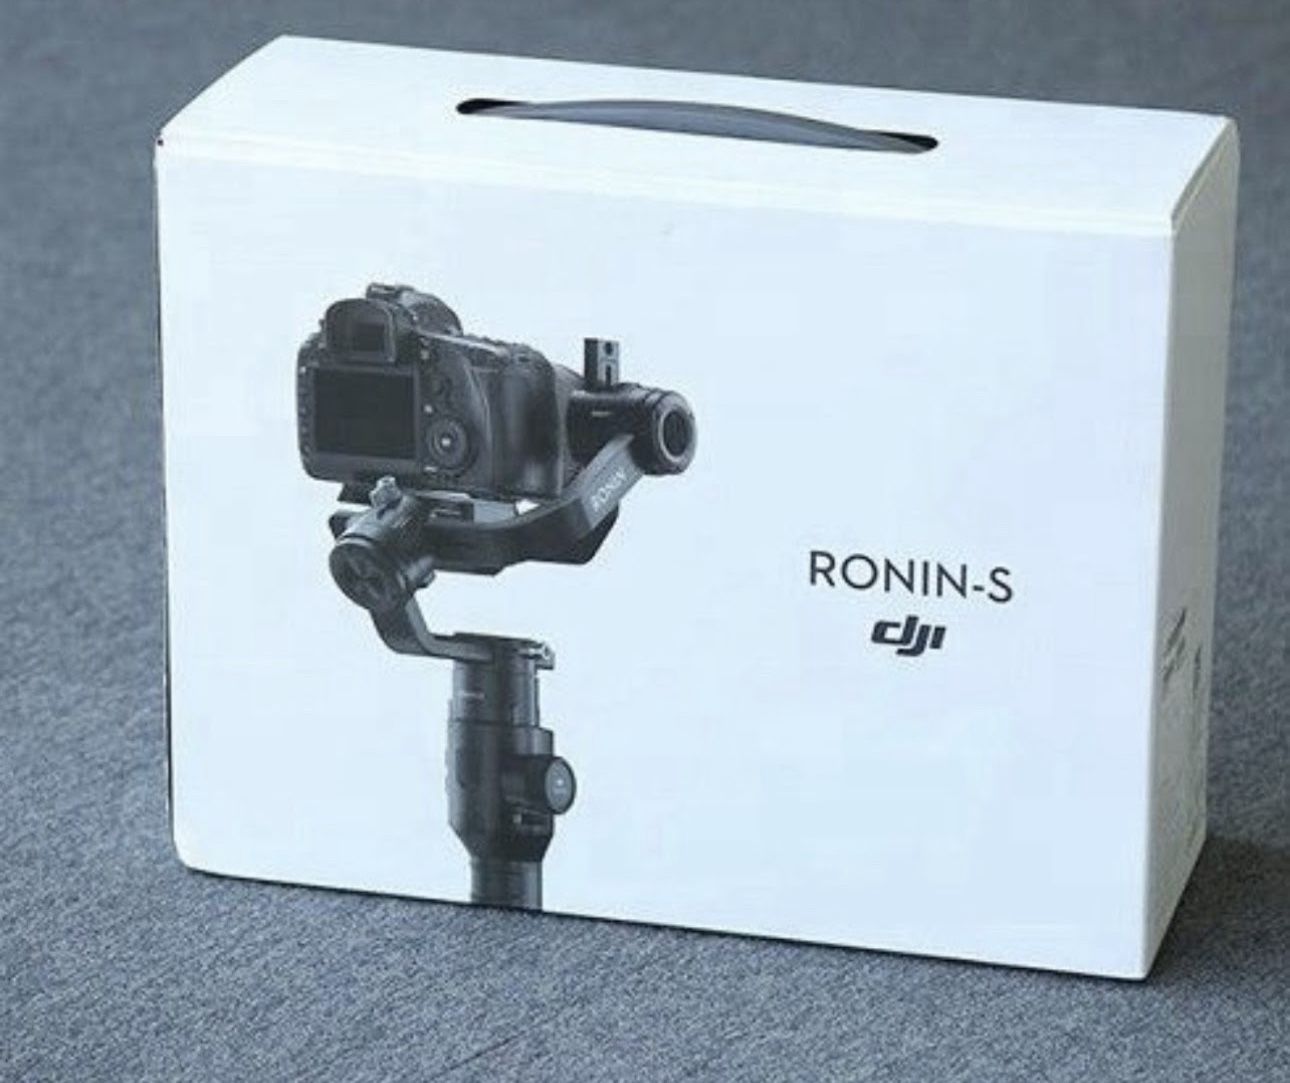 New Condition.  DJI RONIN S